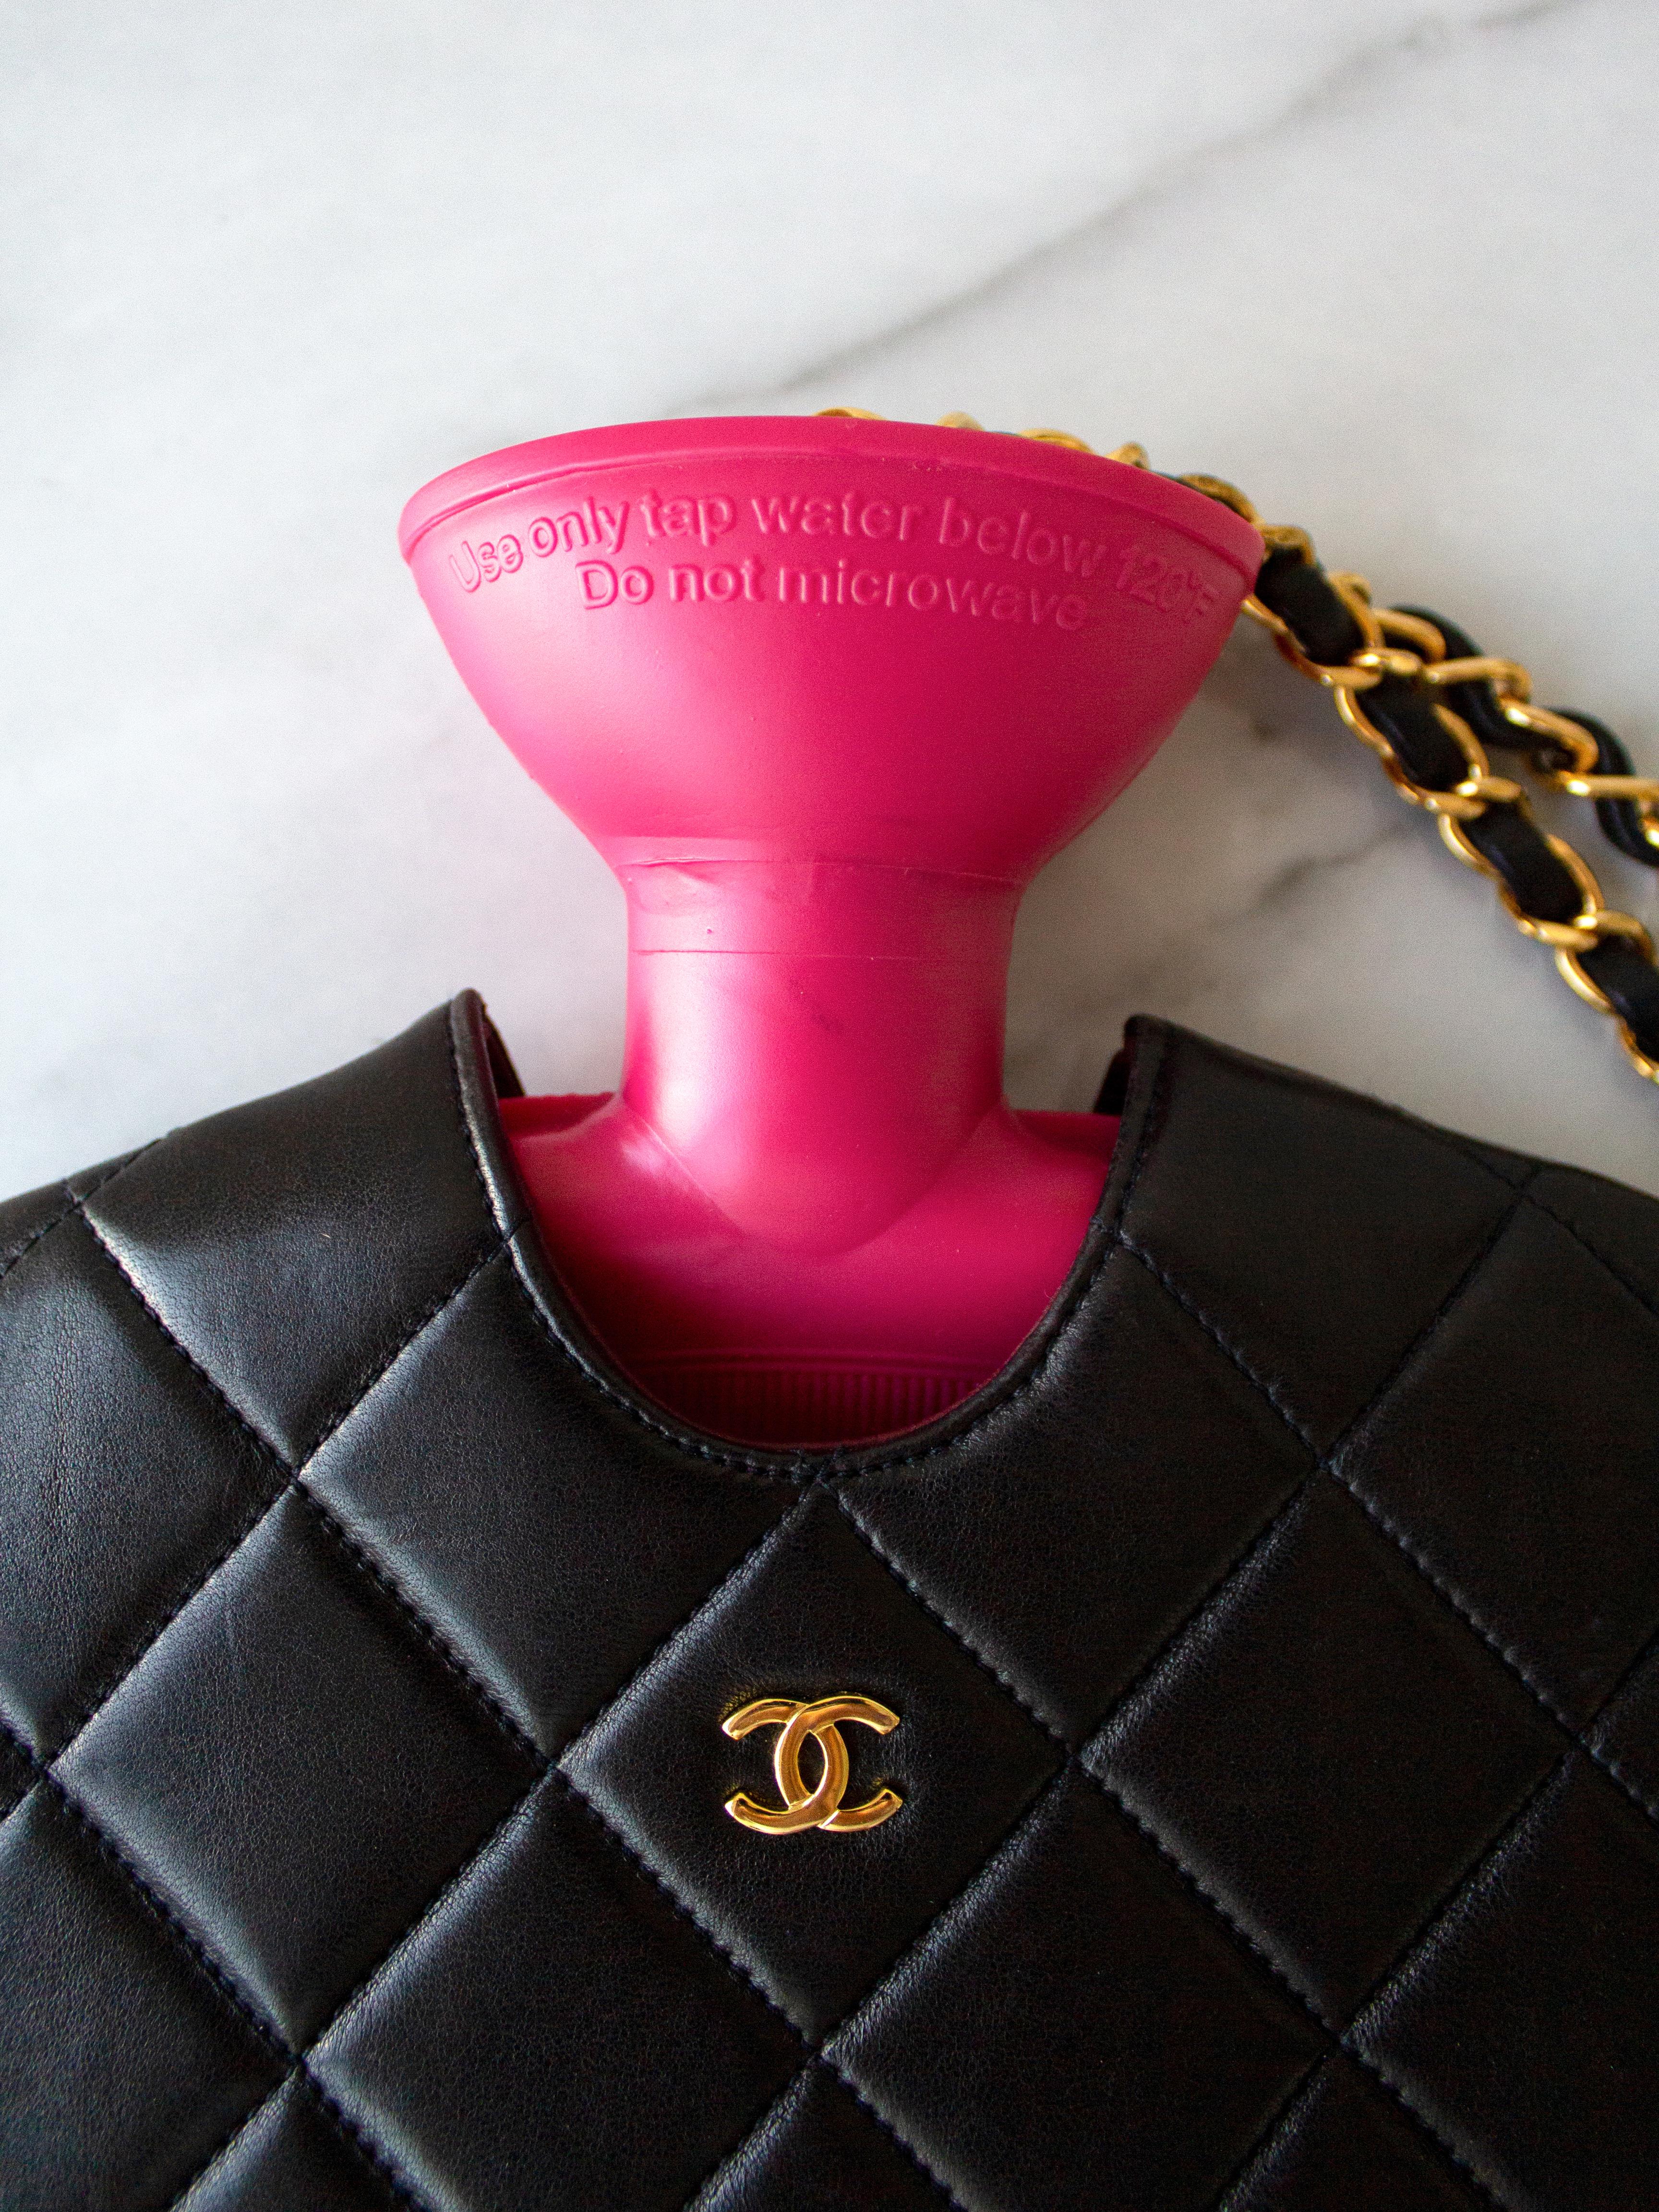 Extremely rare hot water bottle bag from Chanel Fall 1993 collection. A real gem for true collectors! Black quilted lambskin cover, in the shape of a miniature garment bag with zipper down the center that opens to reveal a pink rubber water bottle,